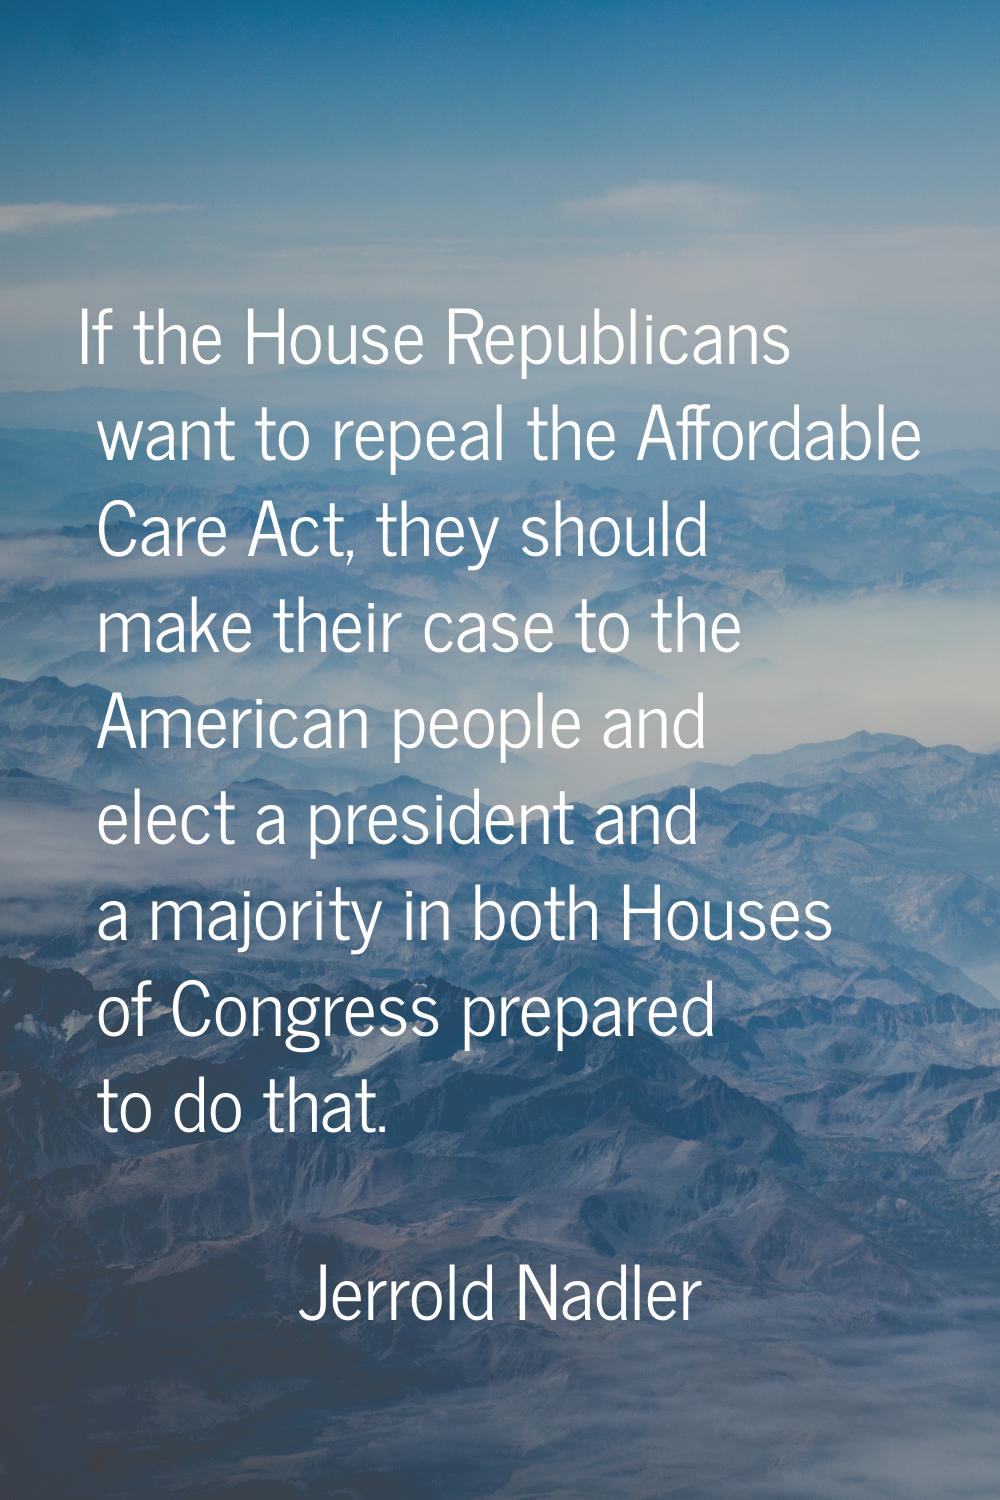 If the House Republicans want to repeal the Affordable Care Act, they should make their case to the